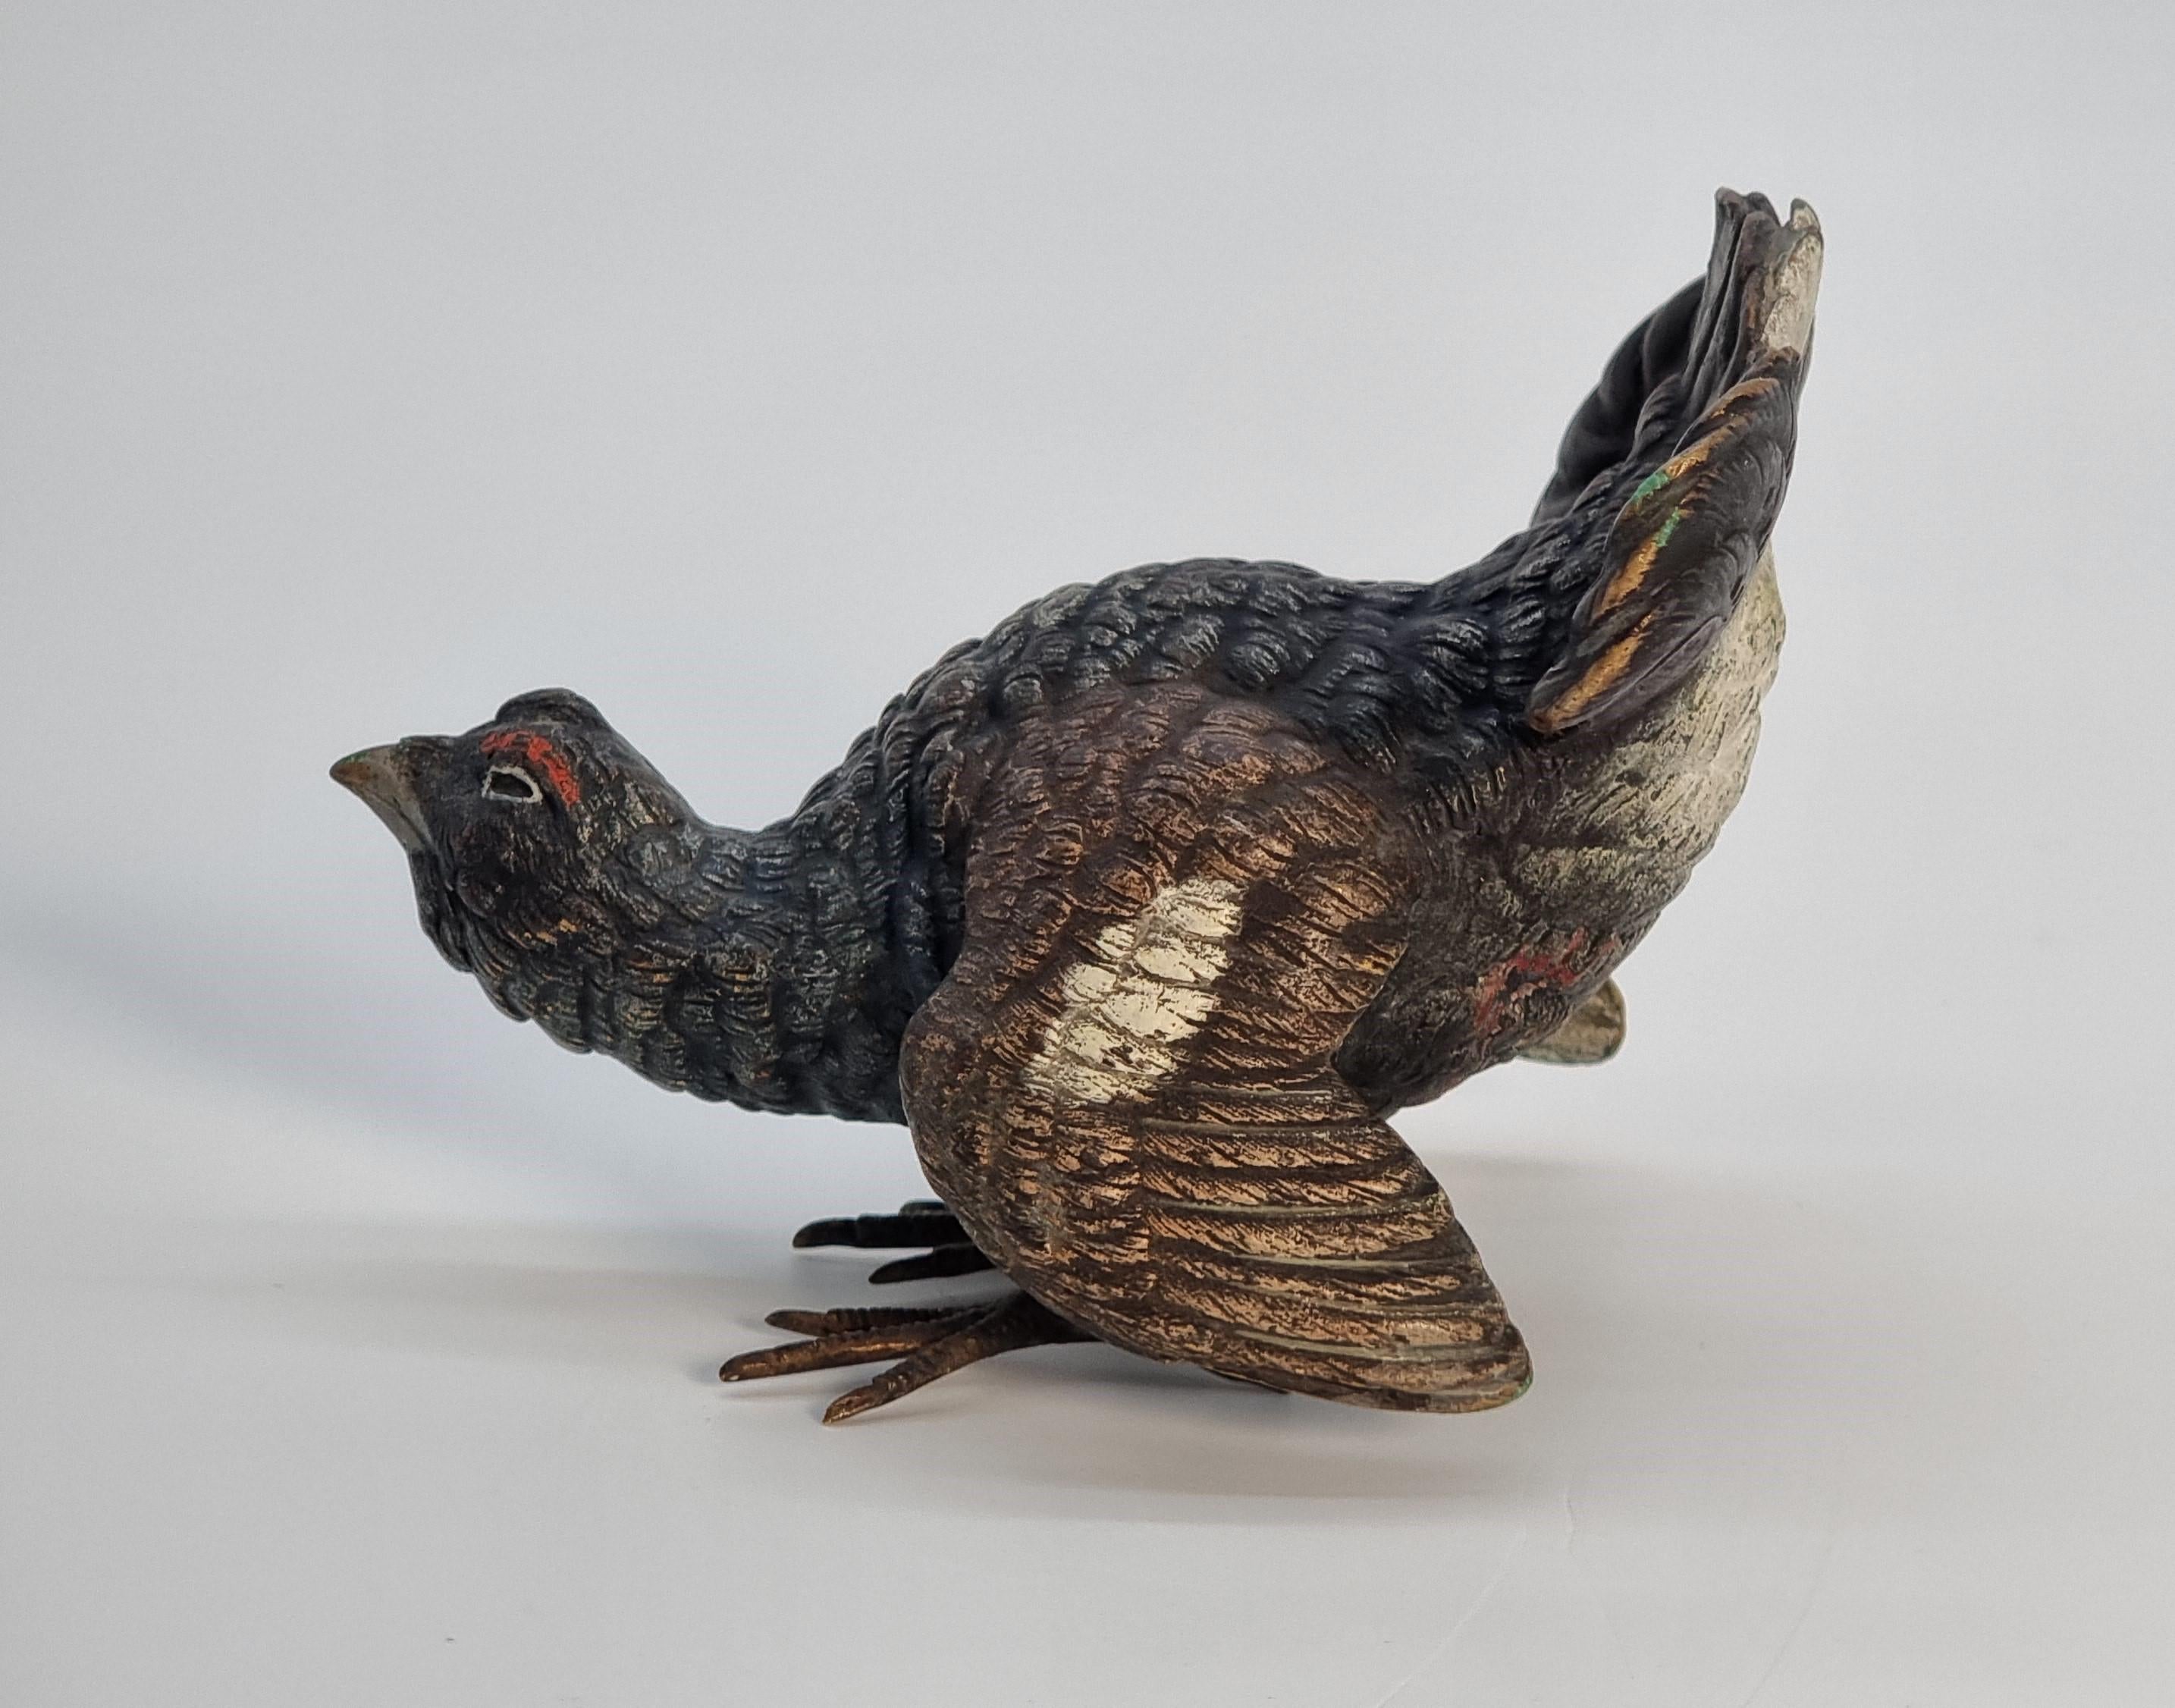 An Austrian Vienna late 19th century cold painted bronze study of a capercaillie

This very realistic Austrian Vienna cold painted bronze study is a very pleasing example and is beautifully modelled. It shows the male capercaillie in full breeding